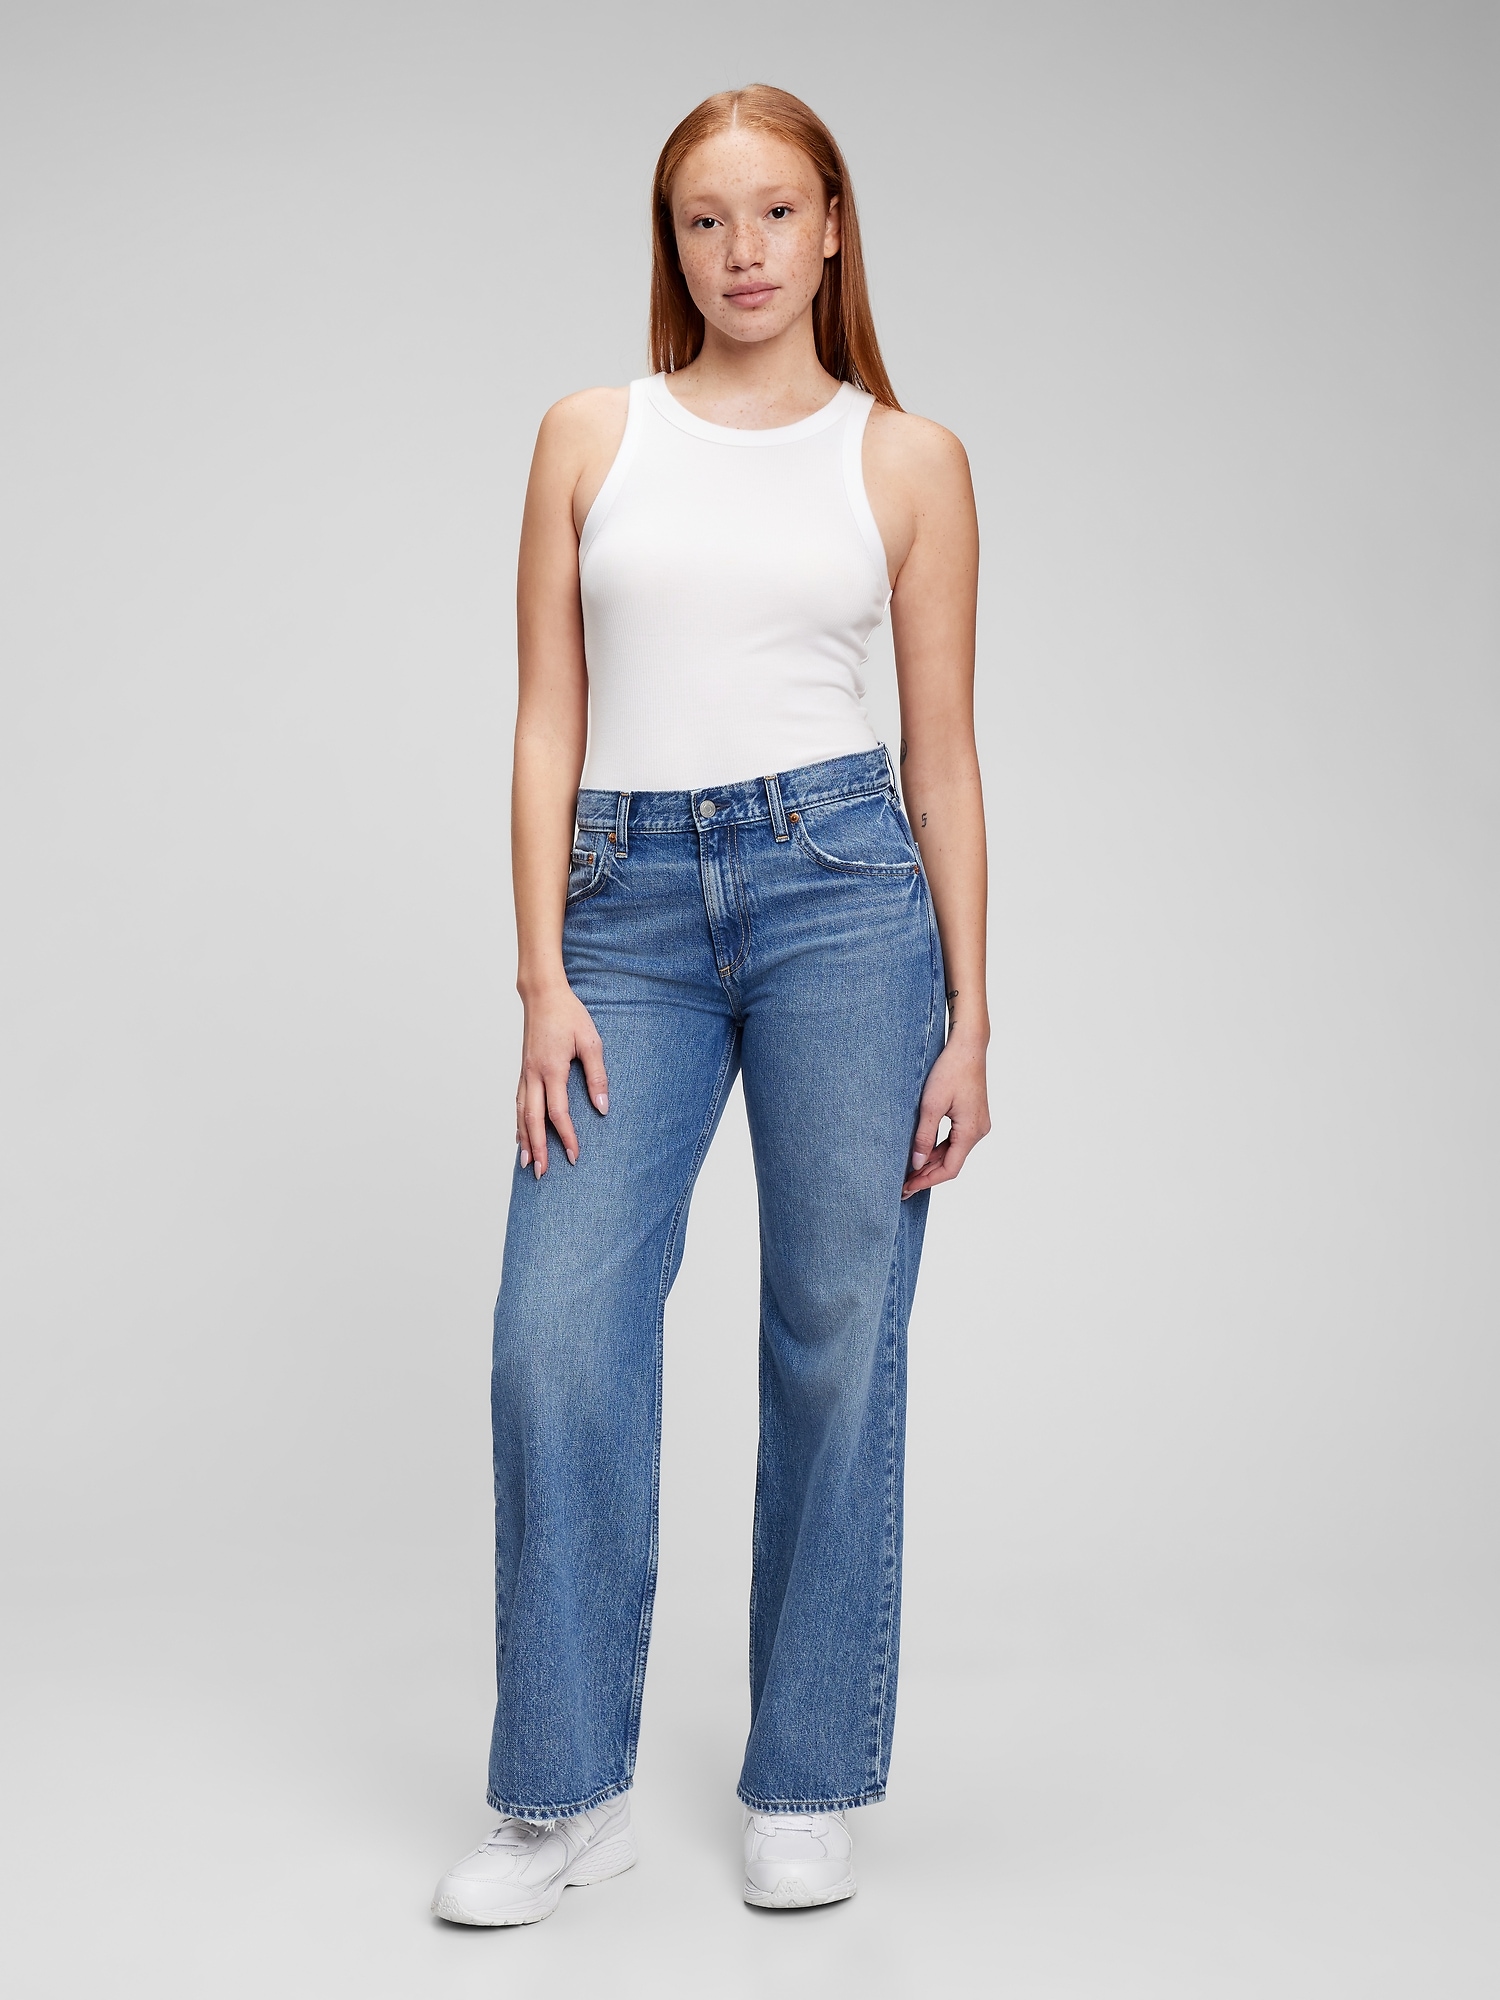 We The Free Shelby Low-Rise Boyfriend Jeans  Low rise boyfriend jeans,  Boyfriend jeans, Low rise jeans